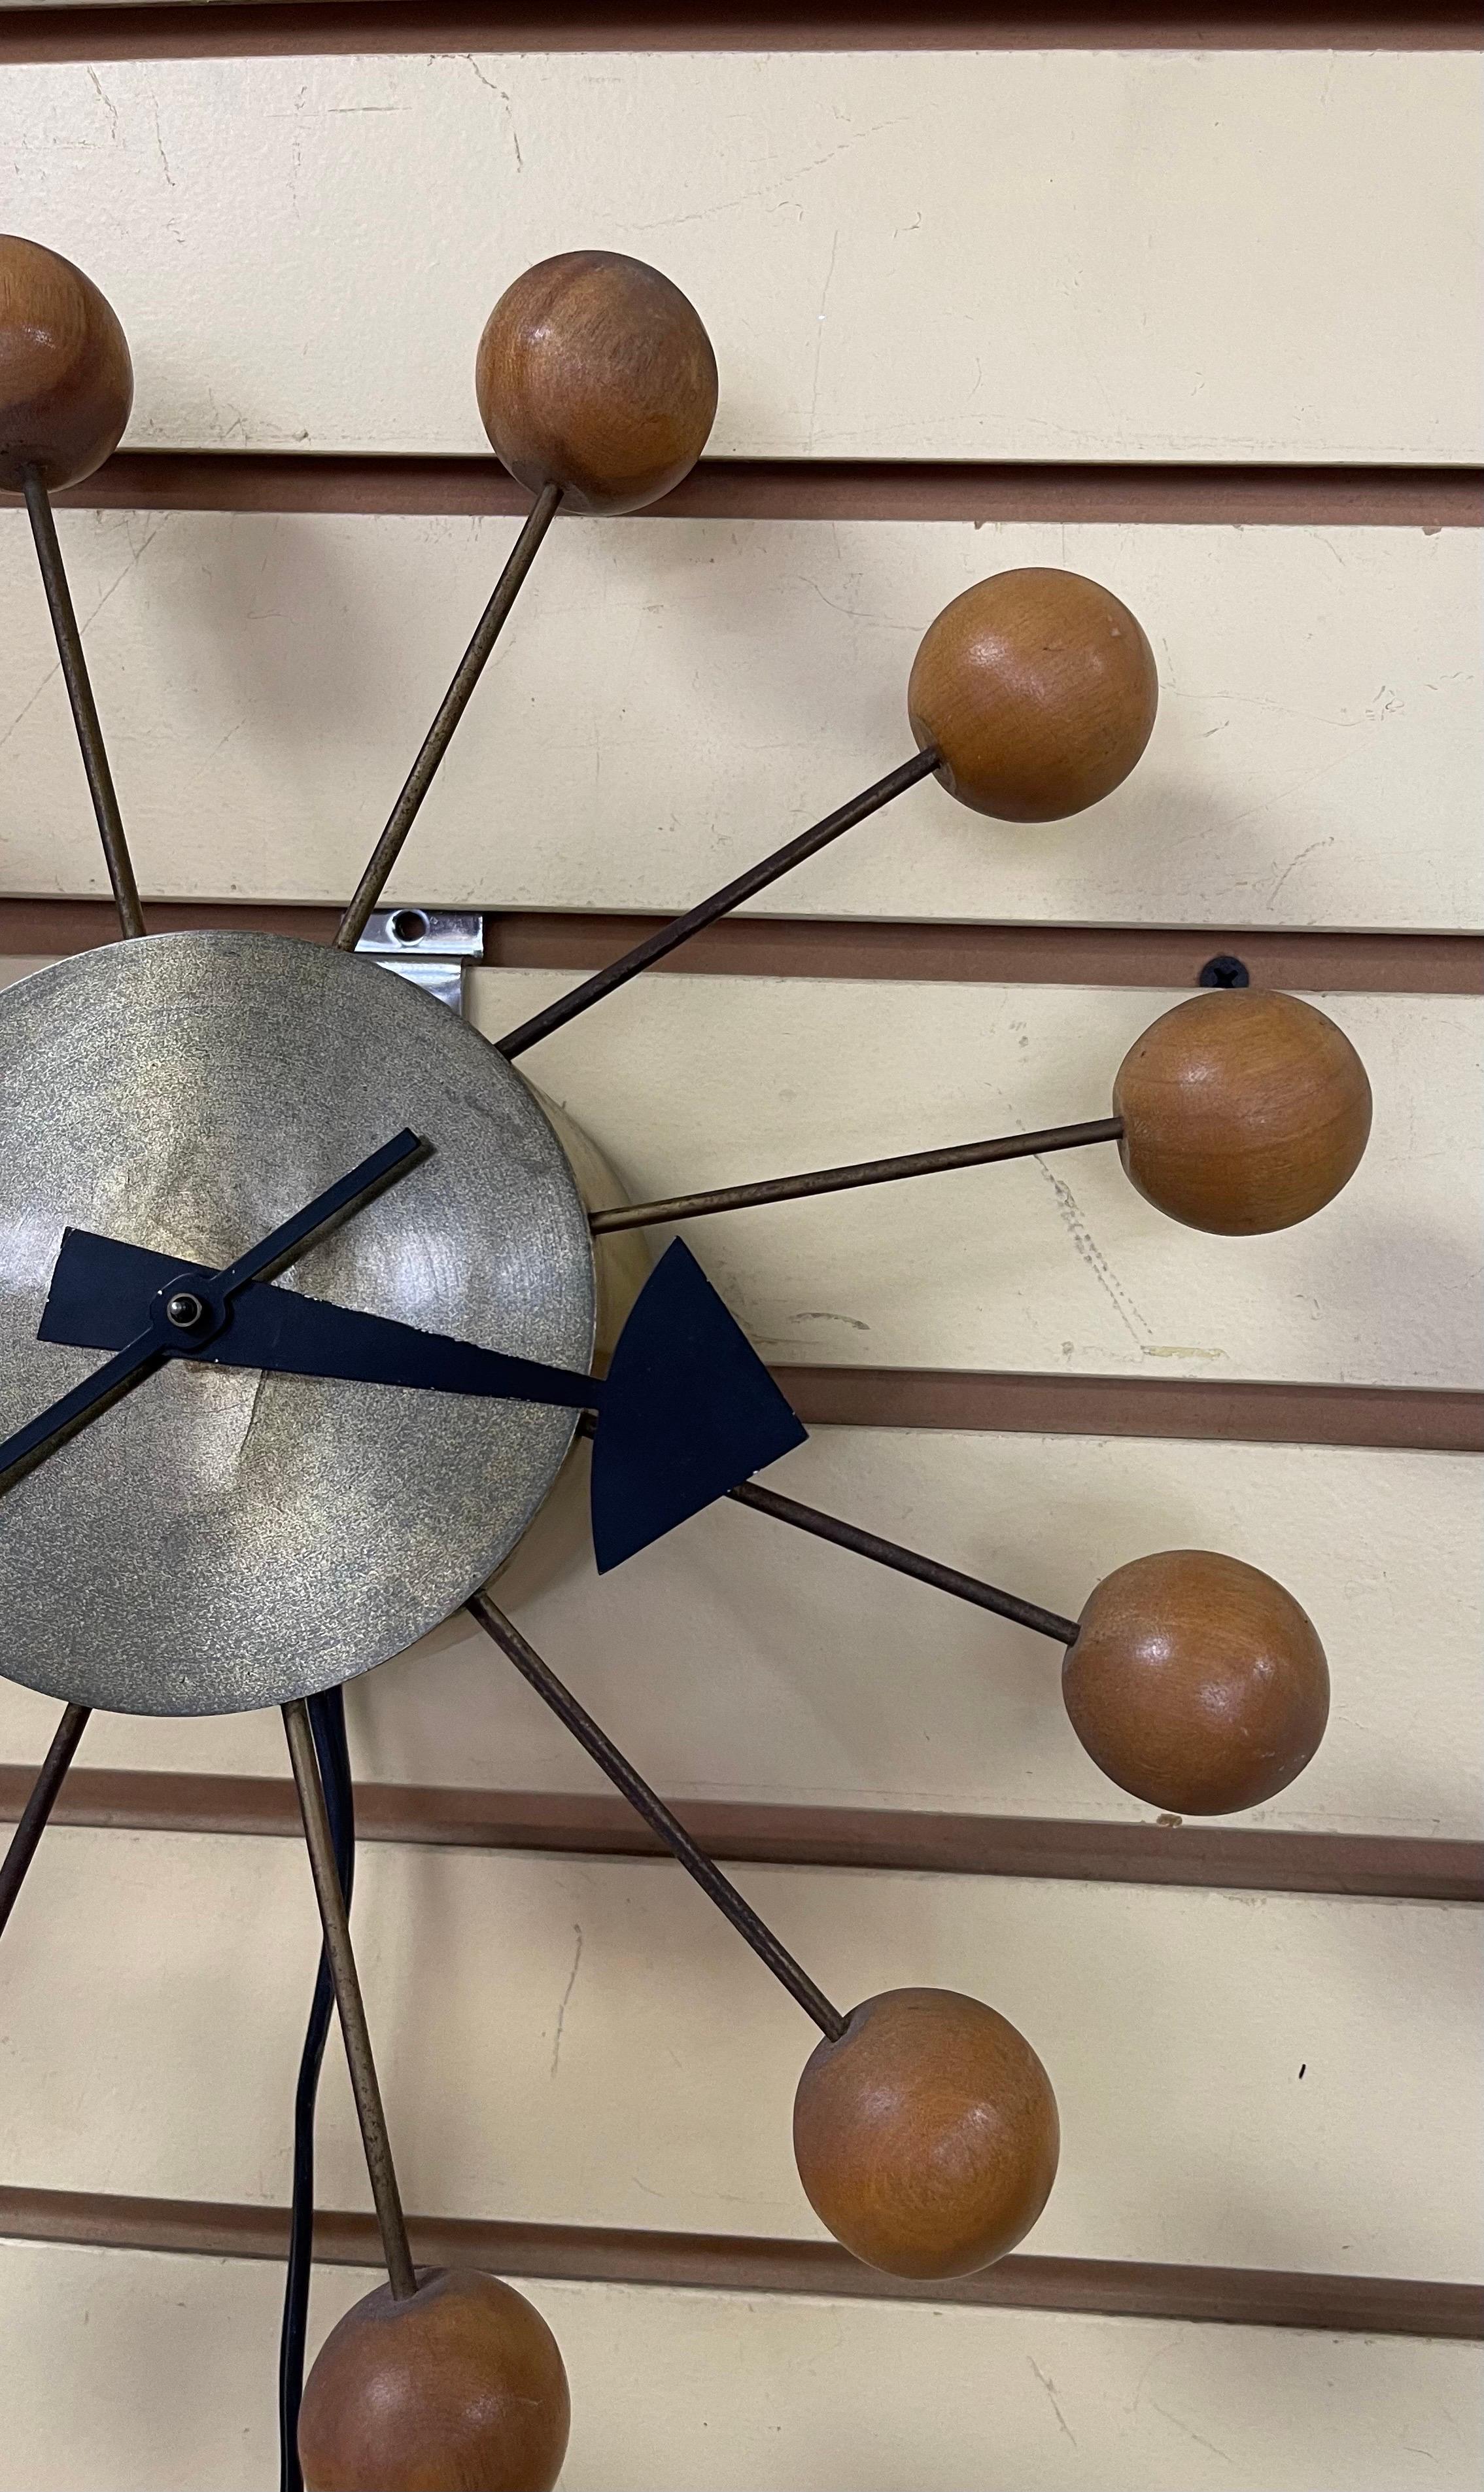 20th Century Early Production Iconic Ball Clock Designed by George Nelson for Howard Miller For Sale